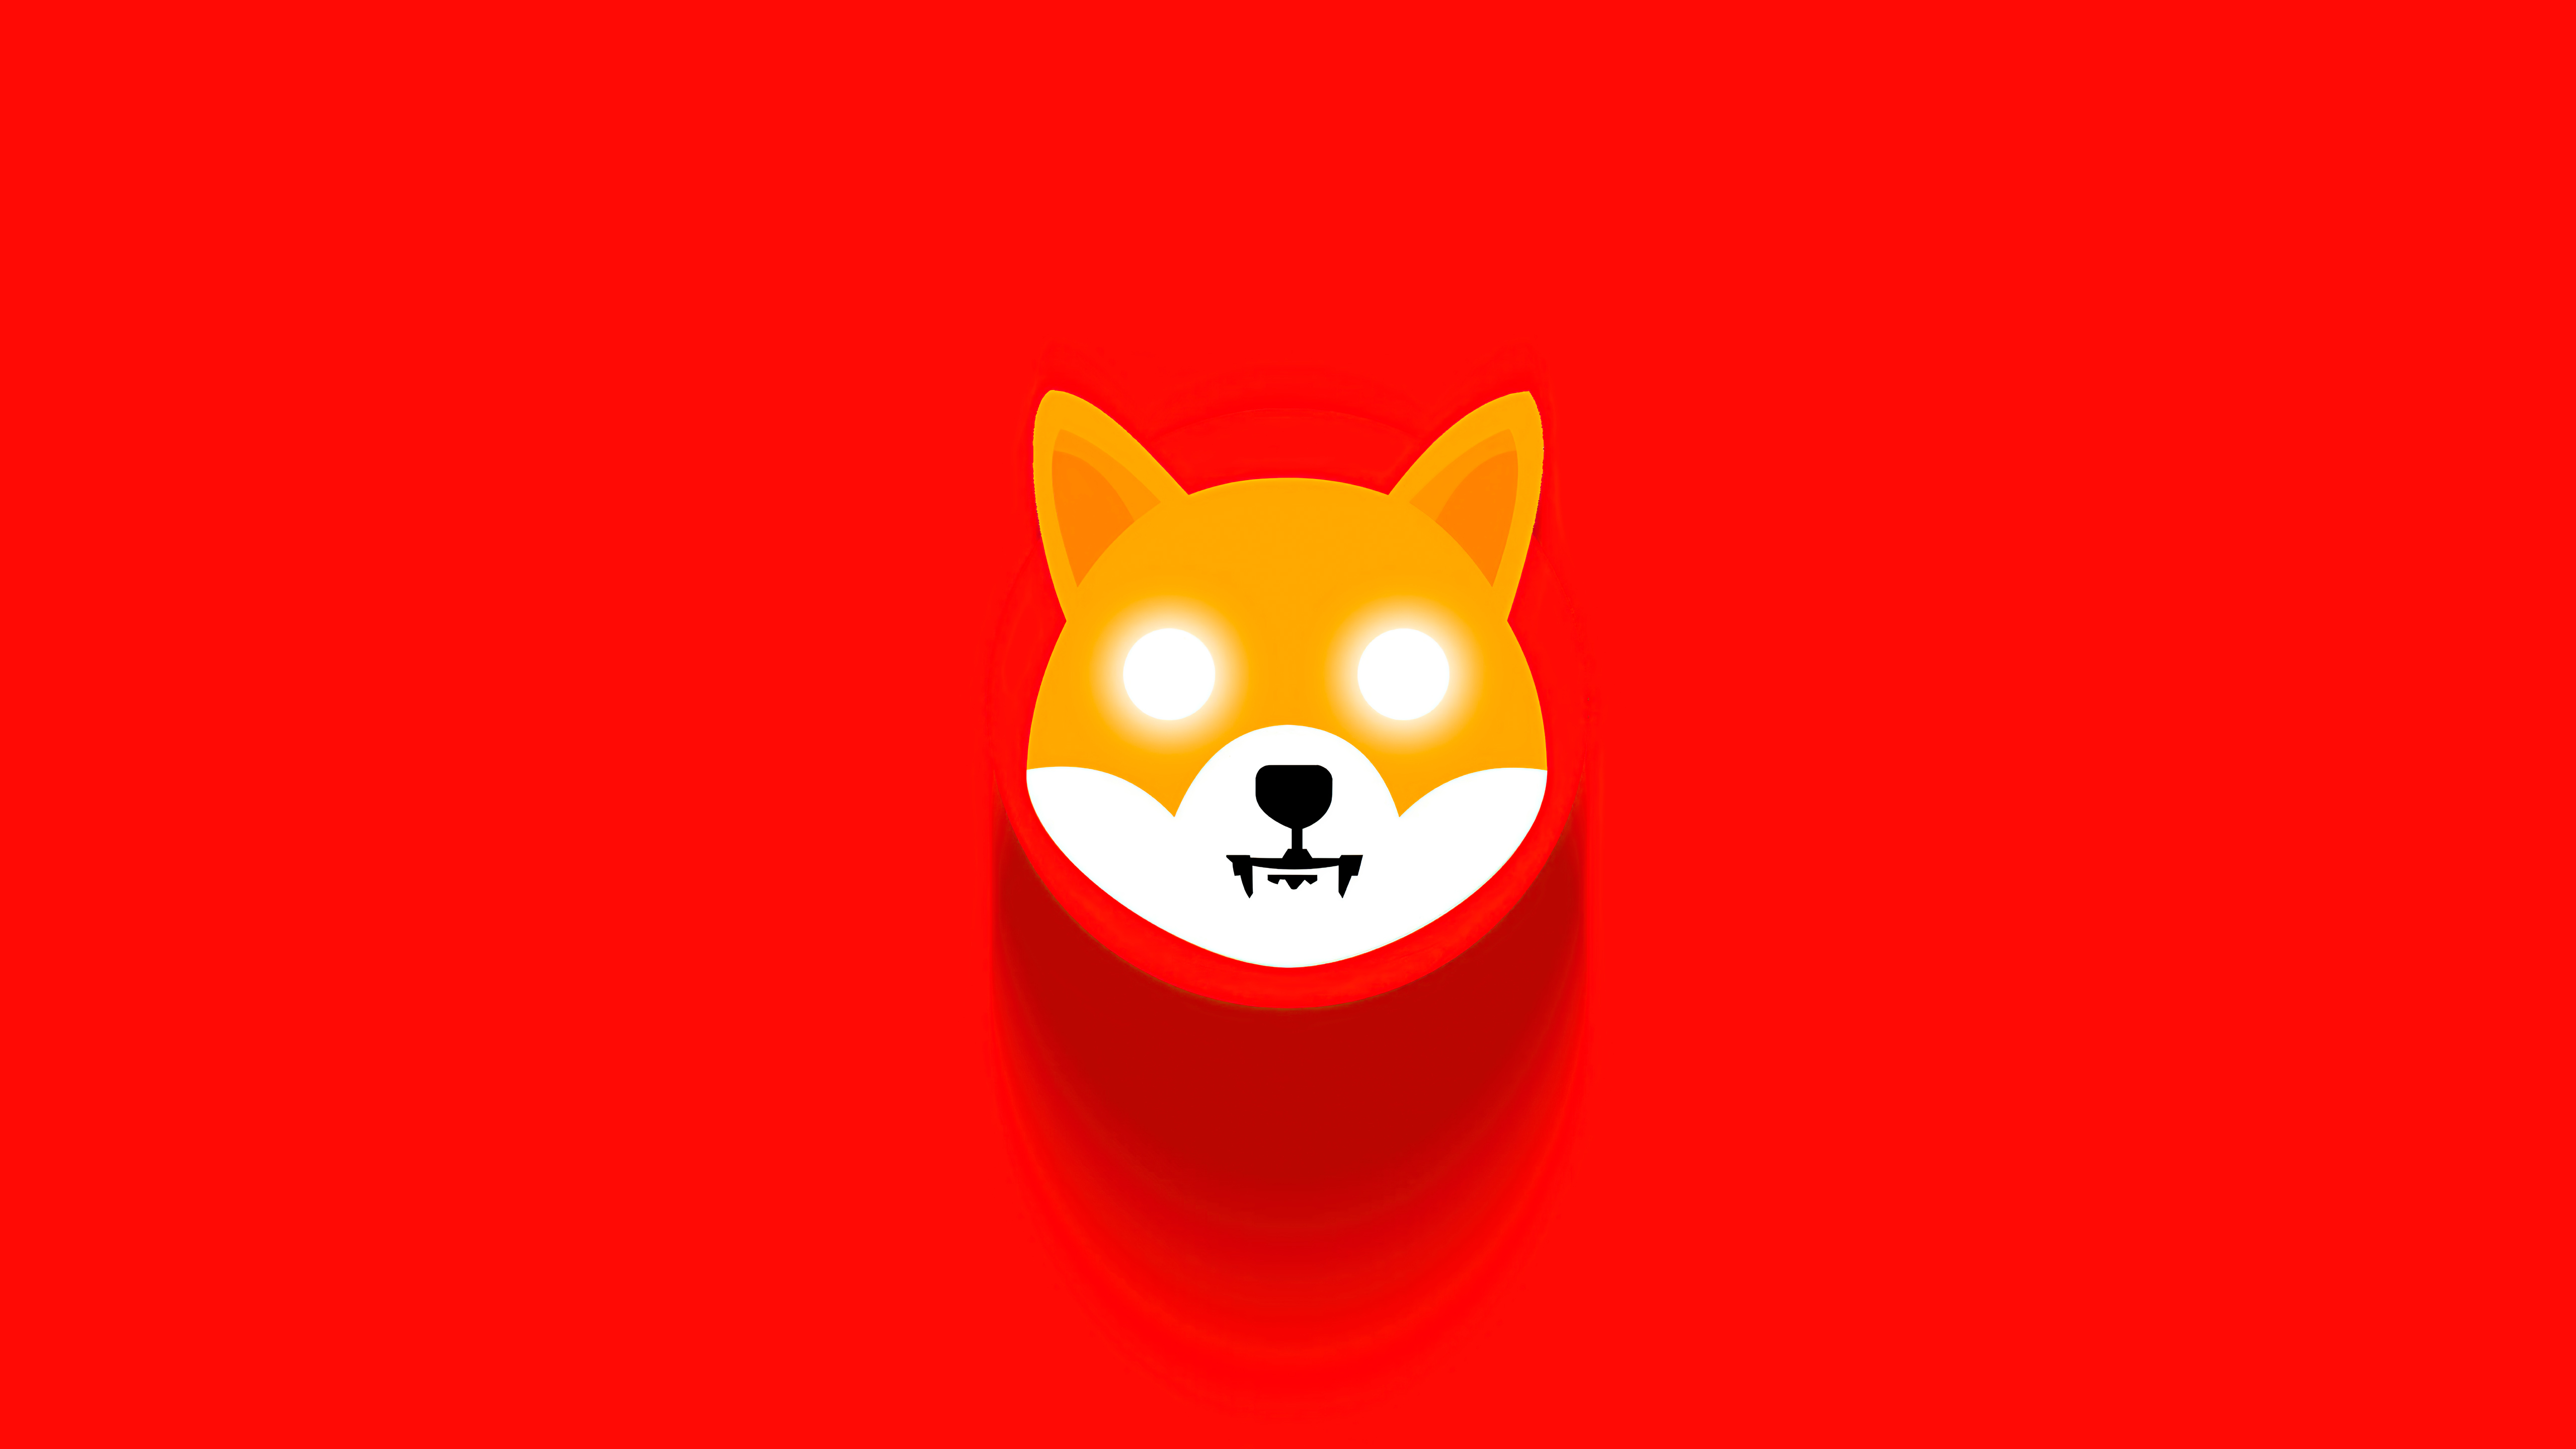 Rendering of a Shiba Inu Face on a Red Background